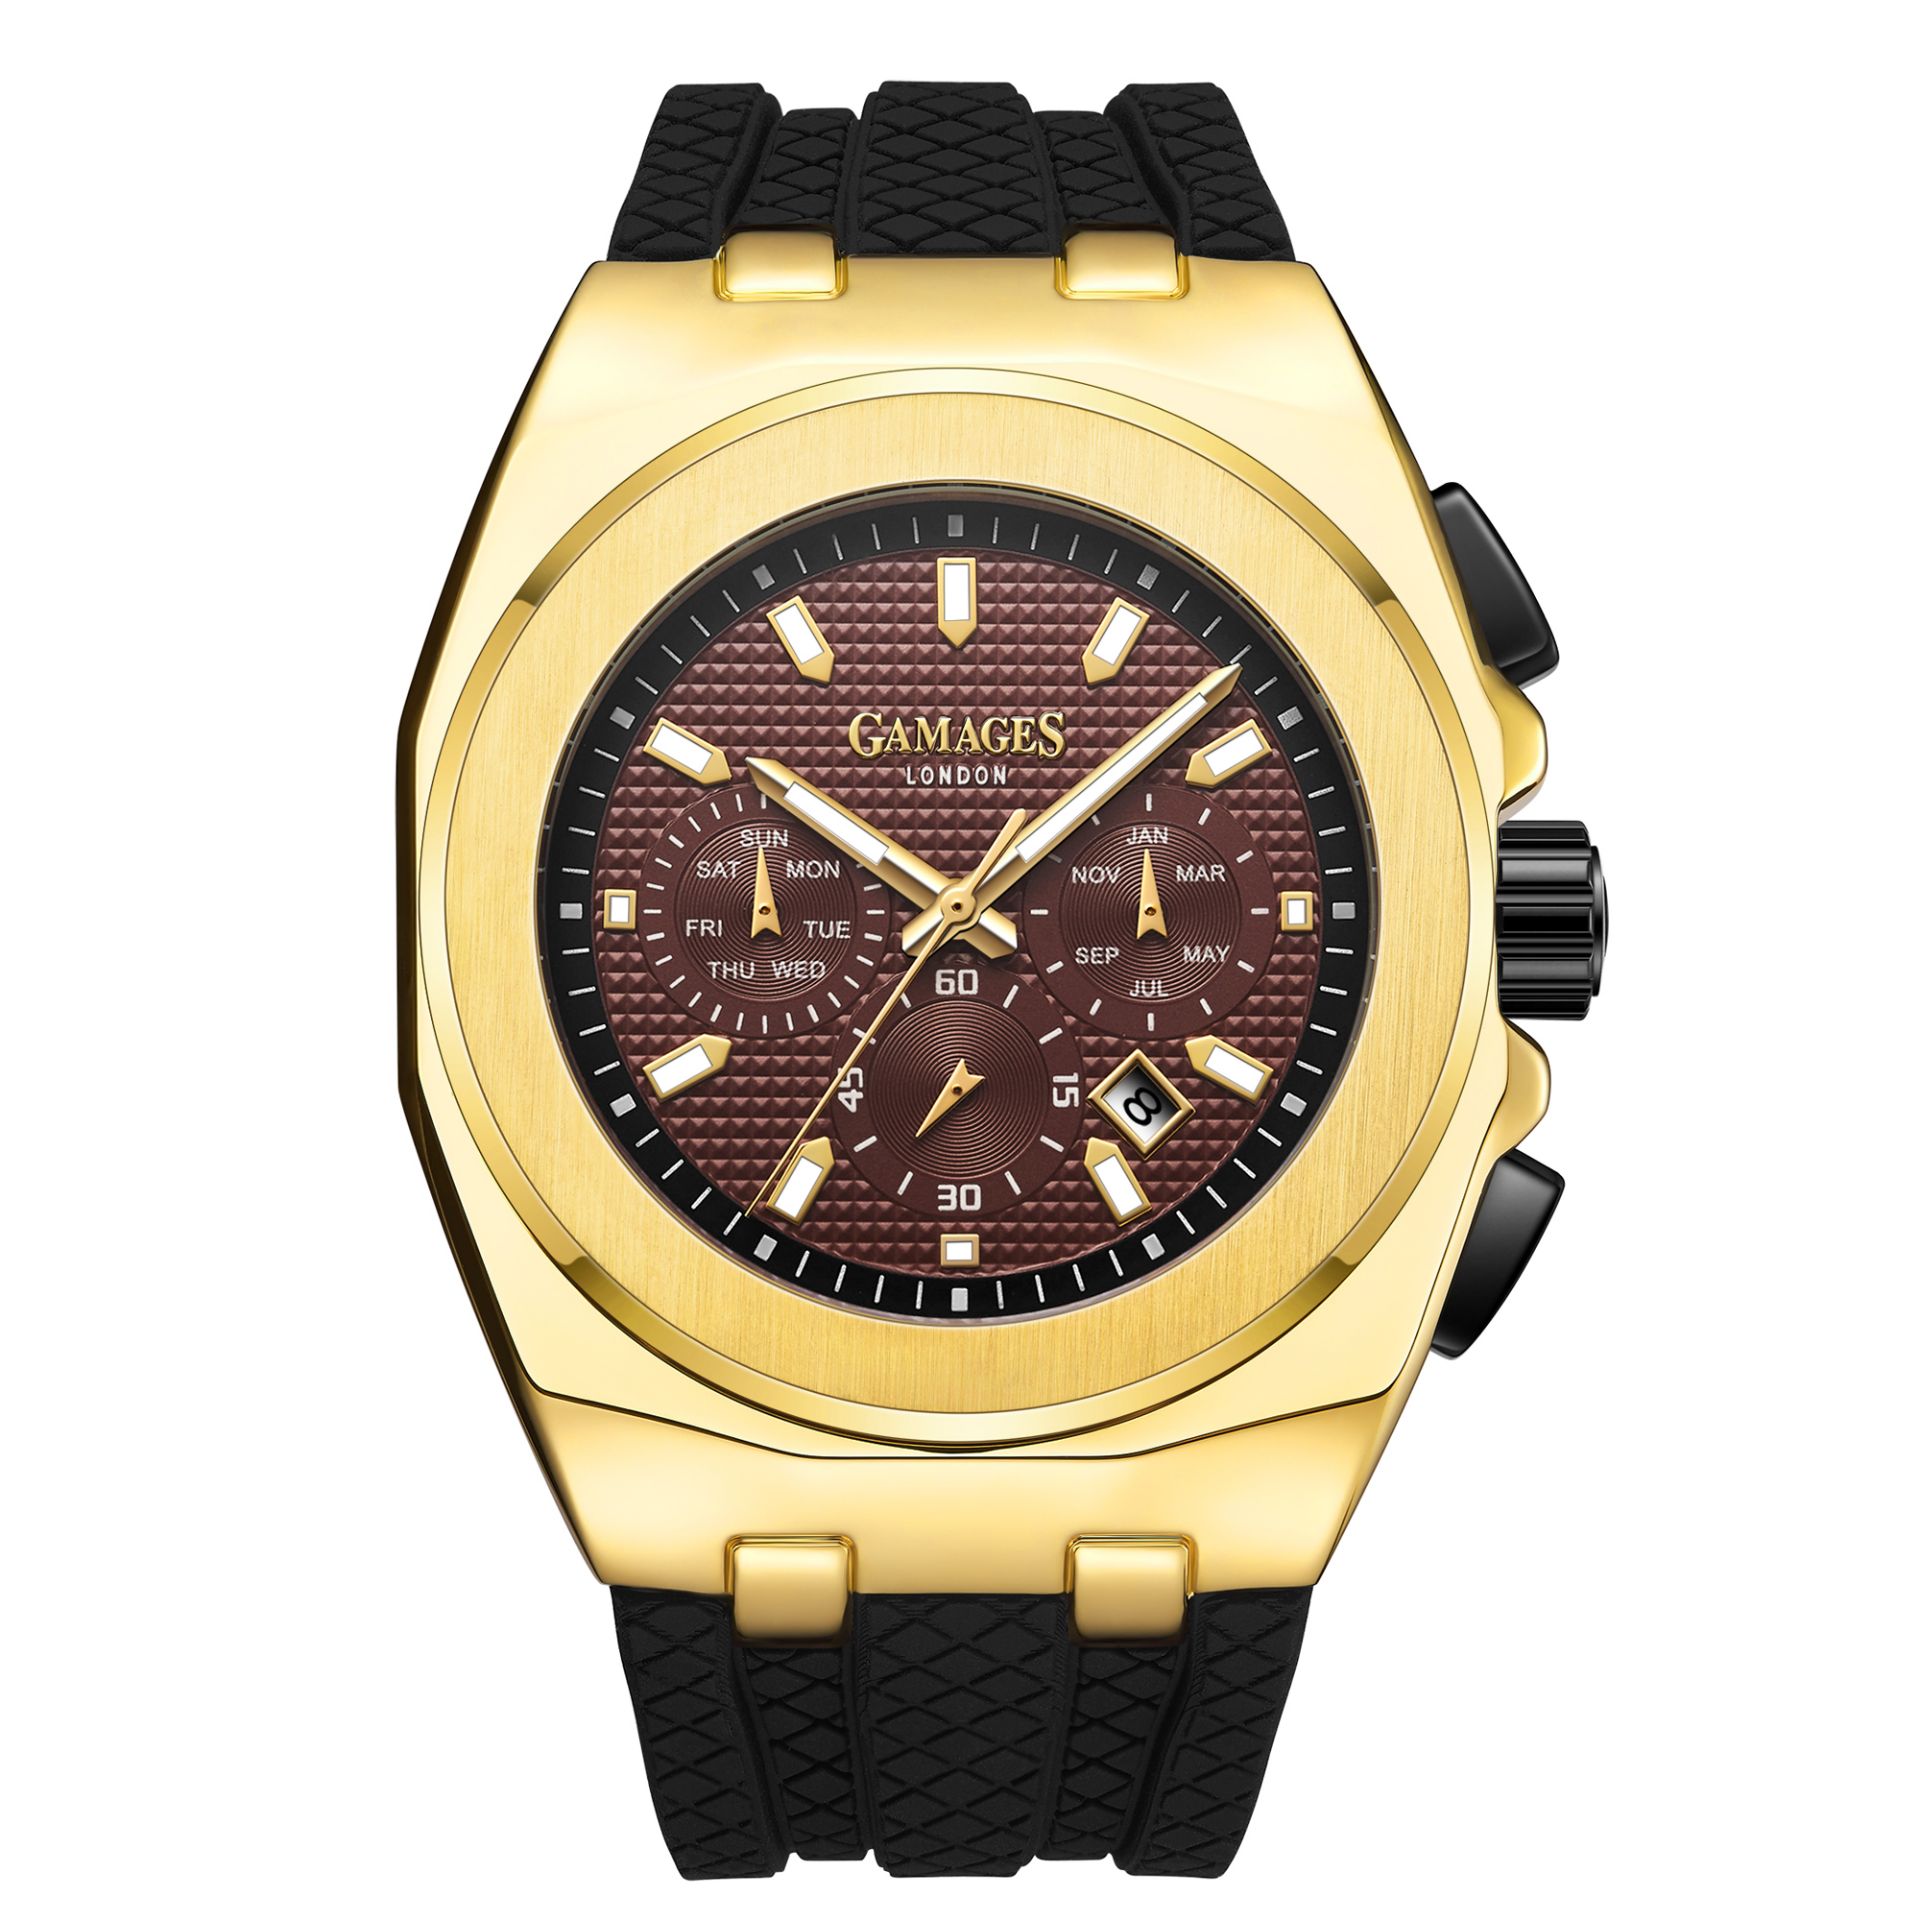 Limited Edition Hand Assembled Gamages Commander Automatic Gold – 5 Year Warranty & Free Delivery